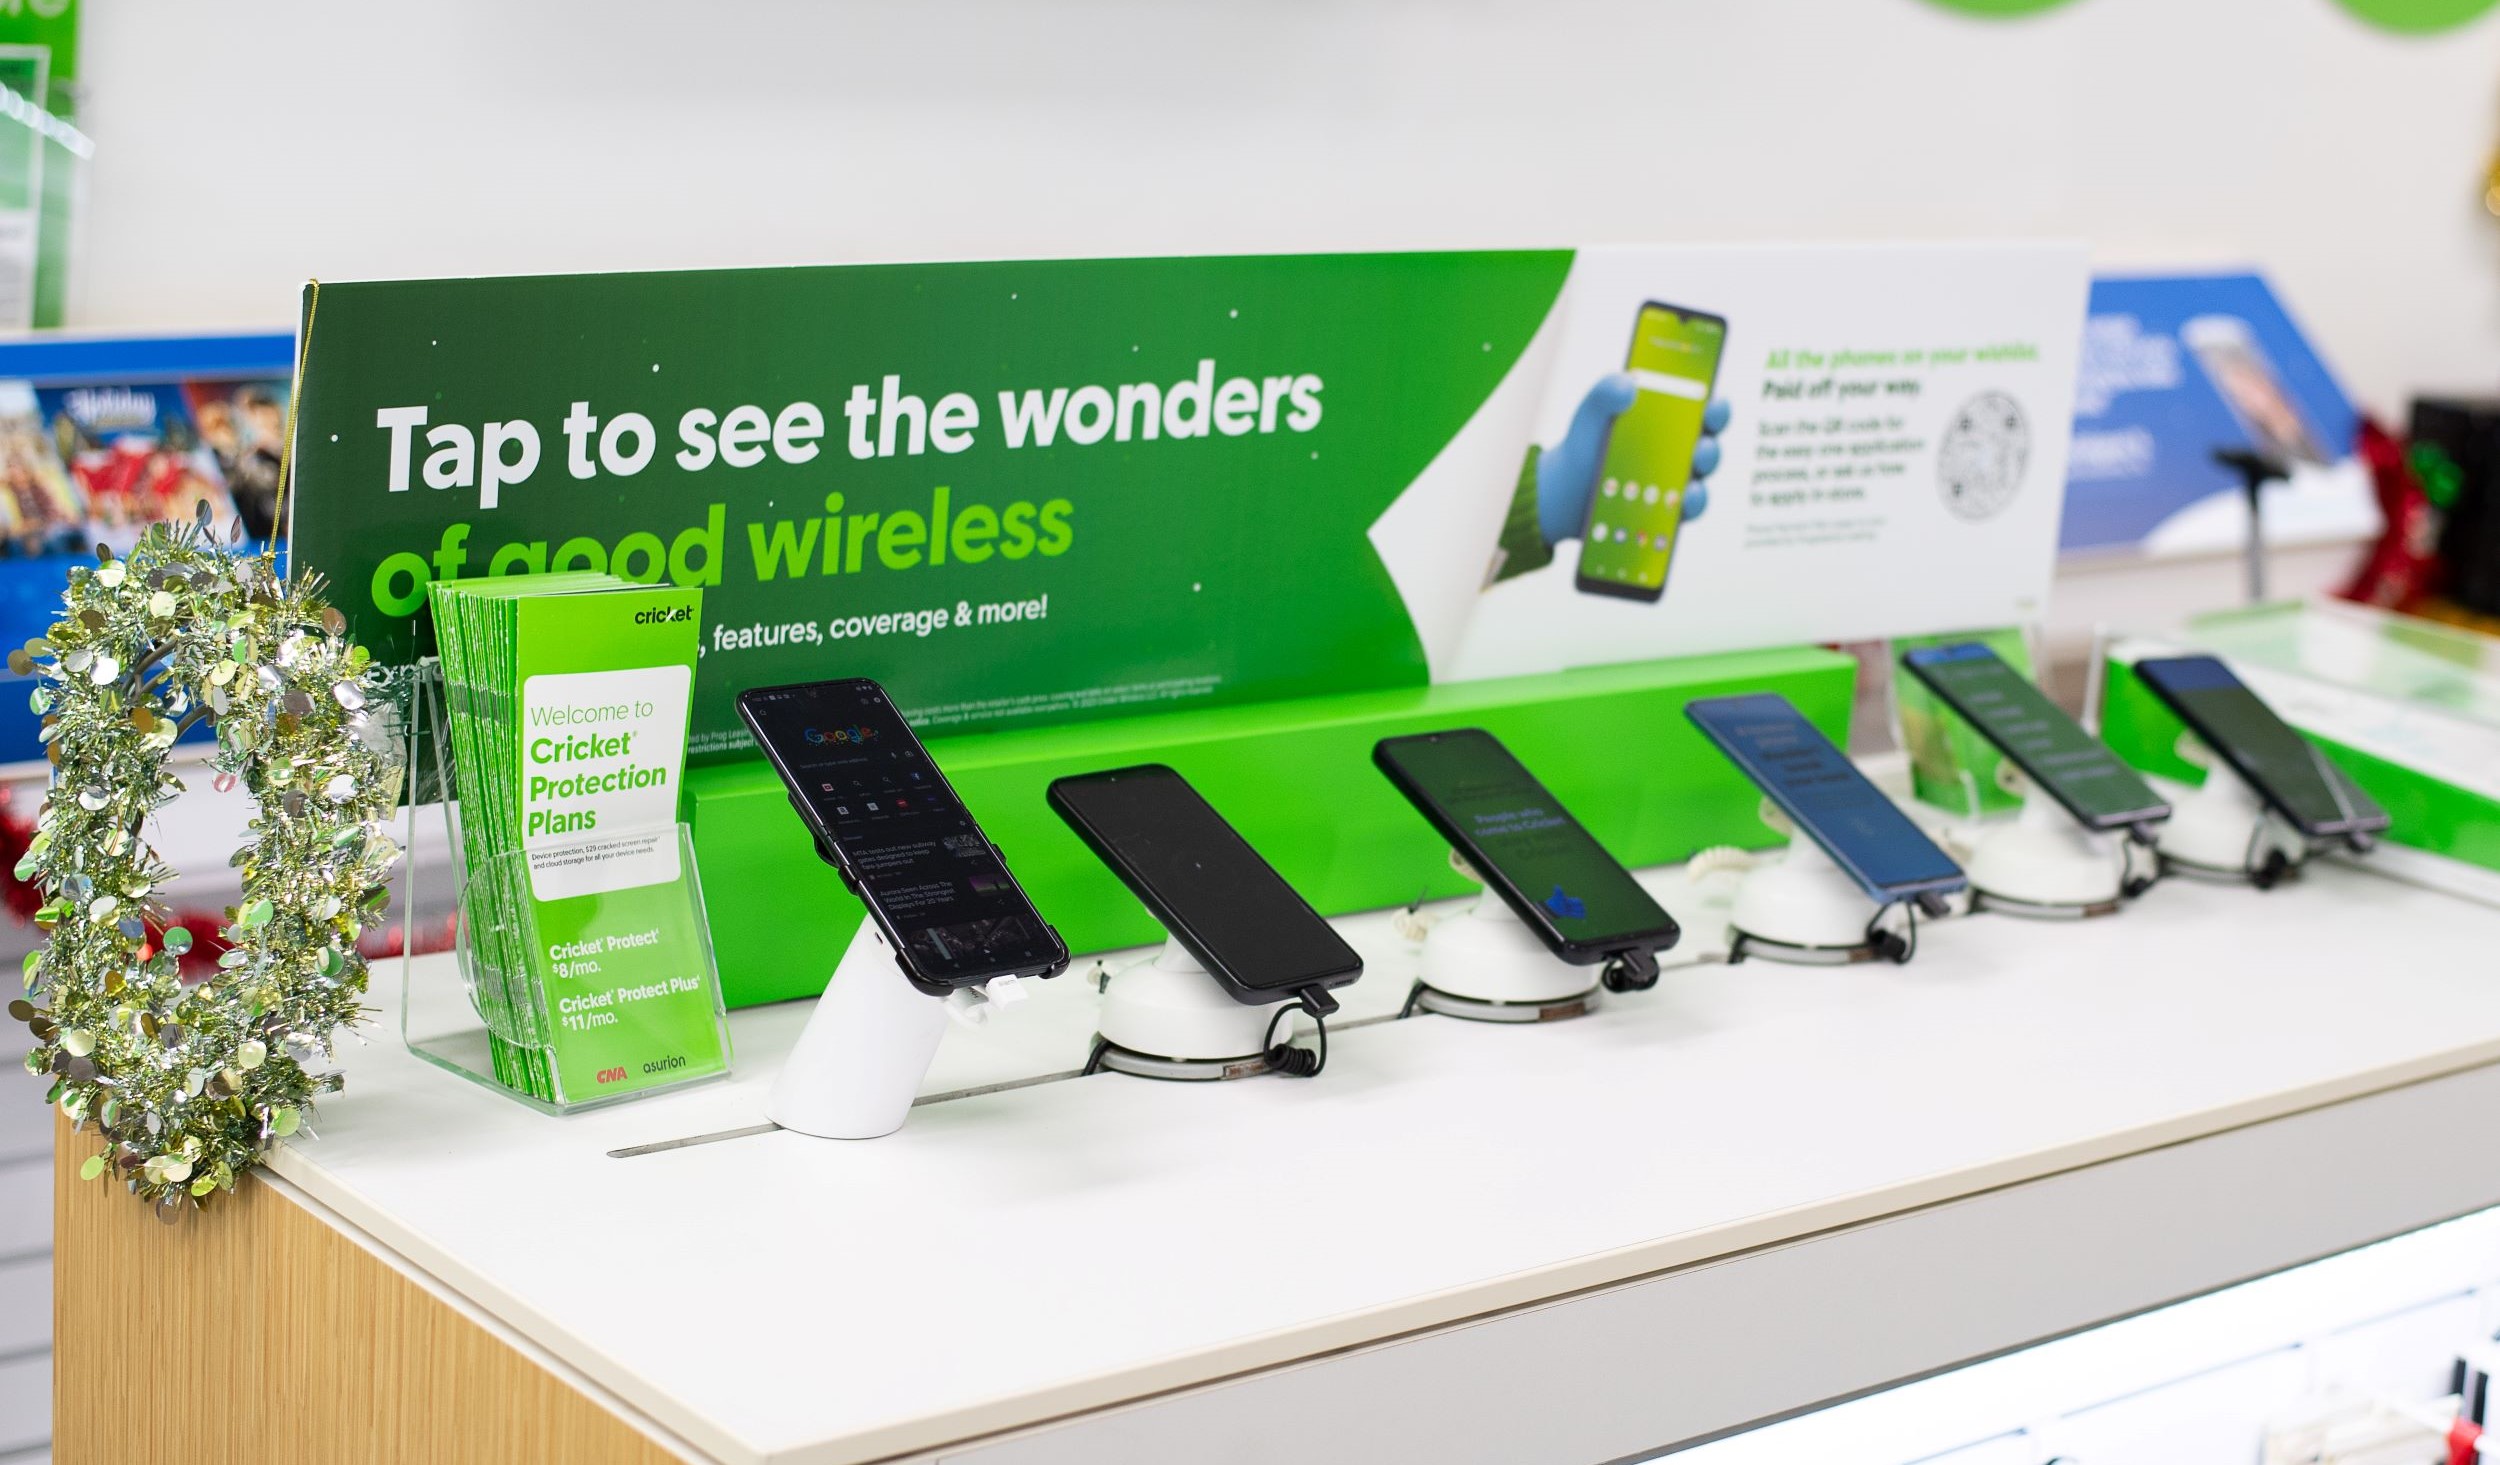 A display of various smartphones secured on a counter with a green promotional cricket wireless banner in the background at a store.